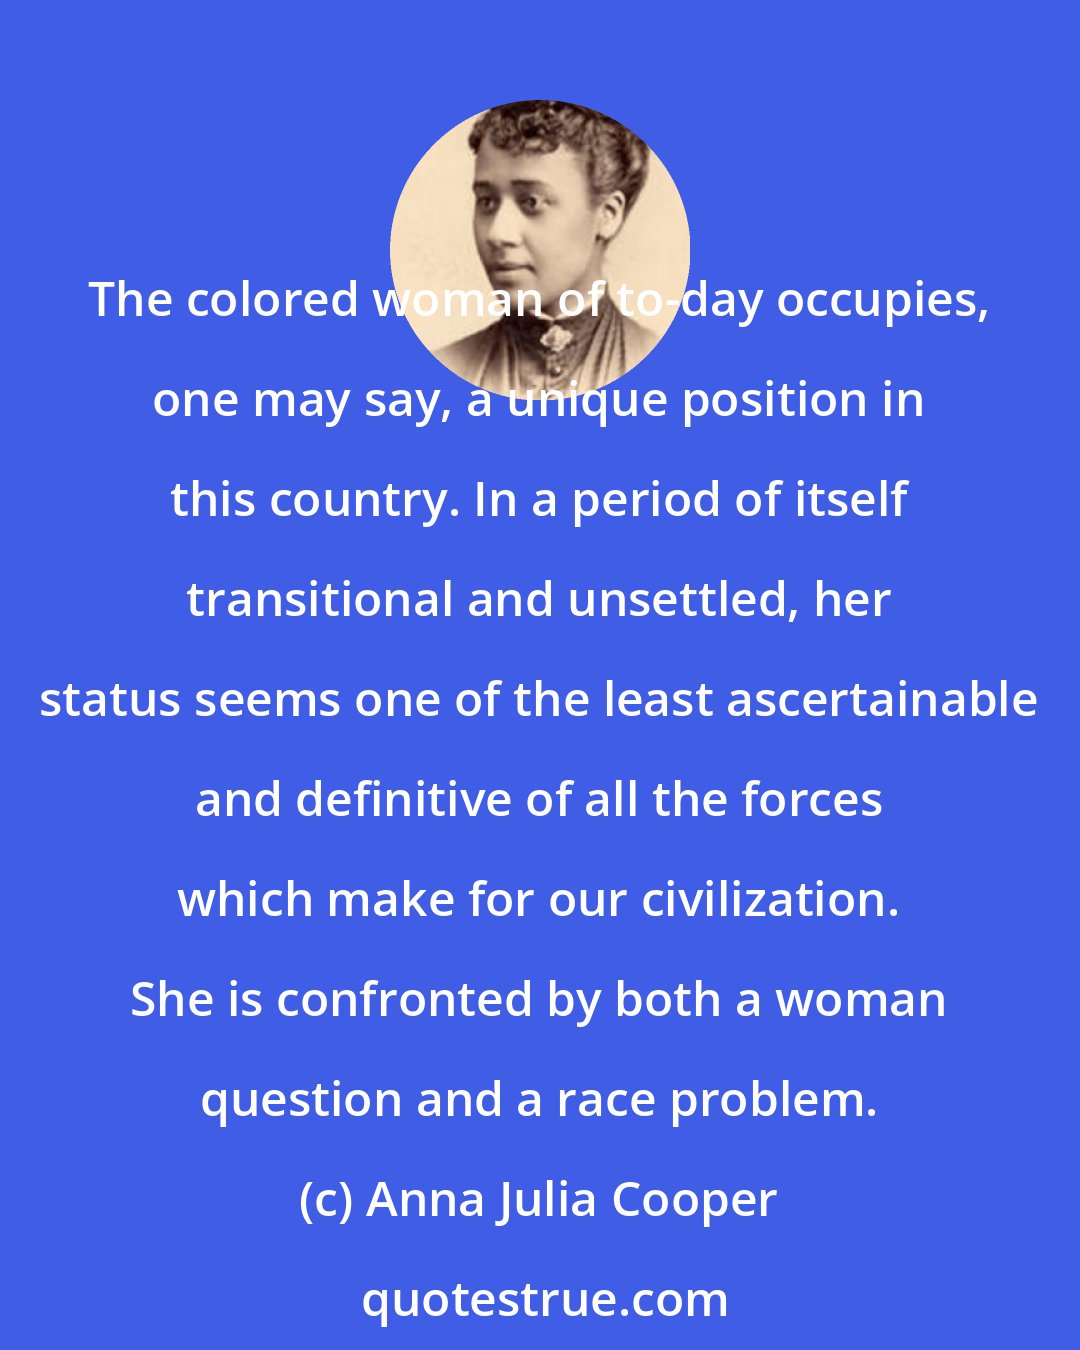 Anna Julia Cooper: The colored woman of to-day occupies, one may say, a unique position in this country. In a period of itself transitional and unsettled, her status seems one of the least ascertainable and definitive of all the forces which make for our civilization. She is confronted by both a woman question and a race problem.